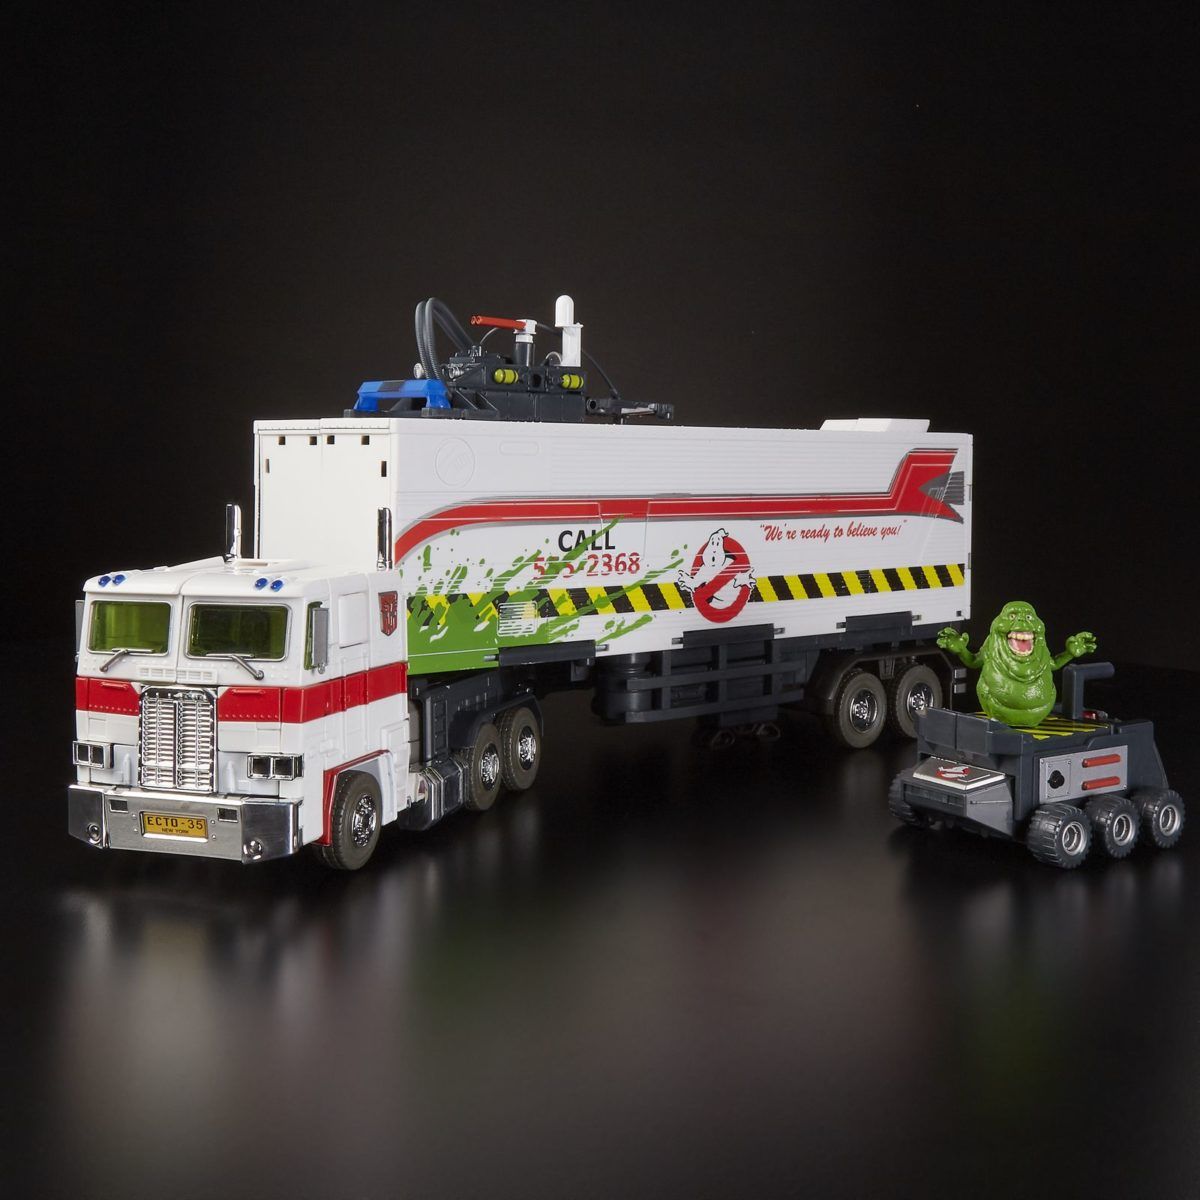 Ghostbusters and Transformers Mash-Up Toy ectotron la sdcc